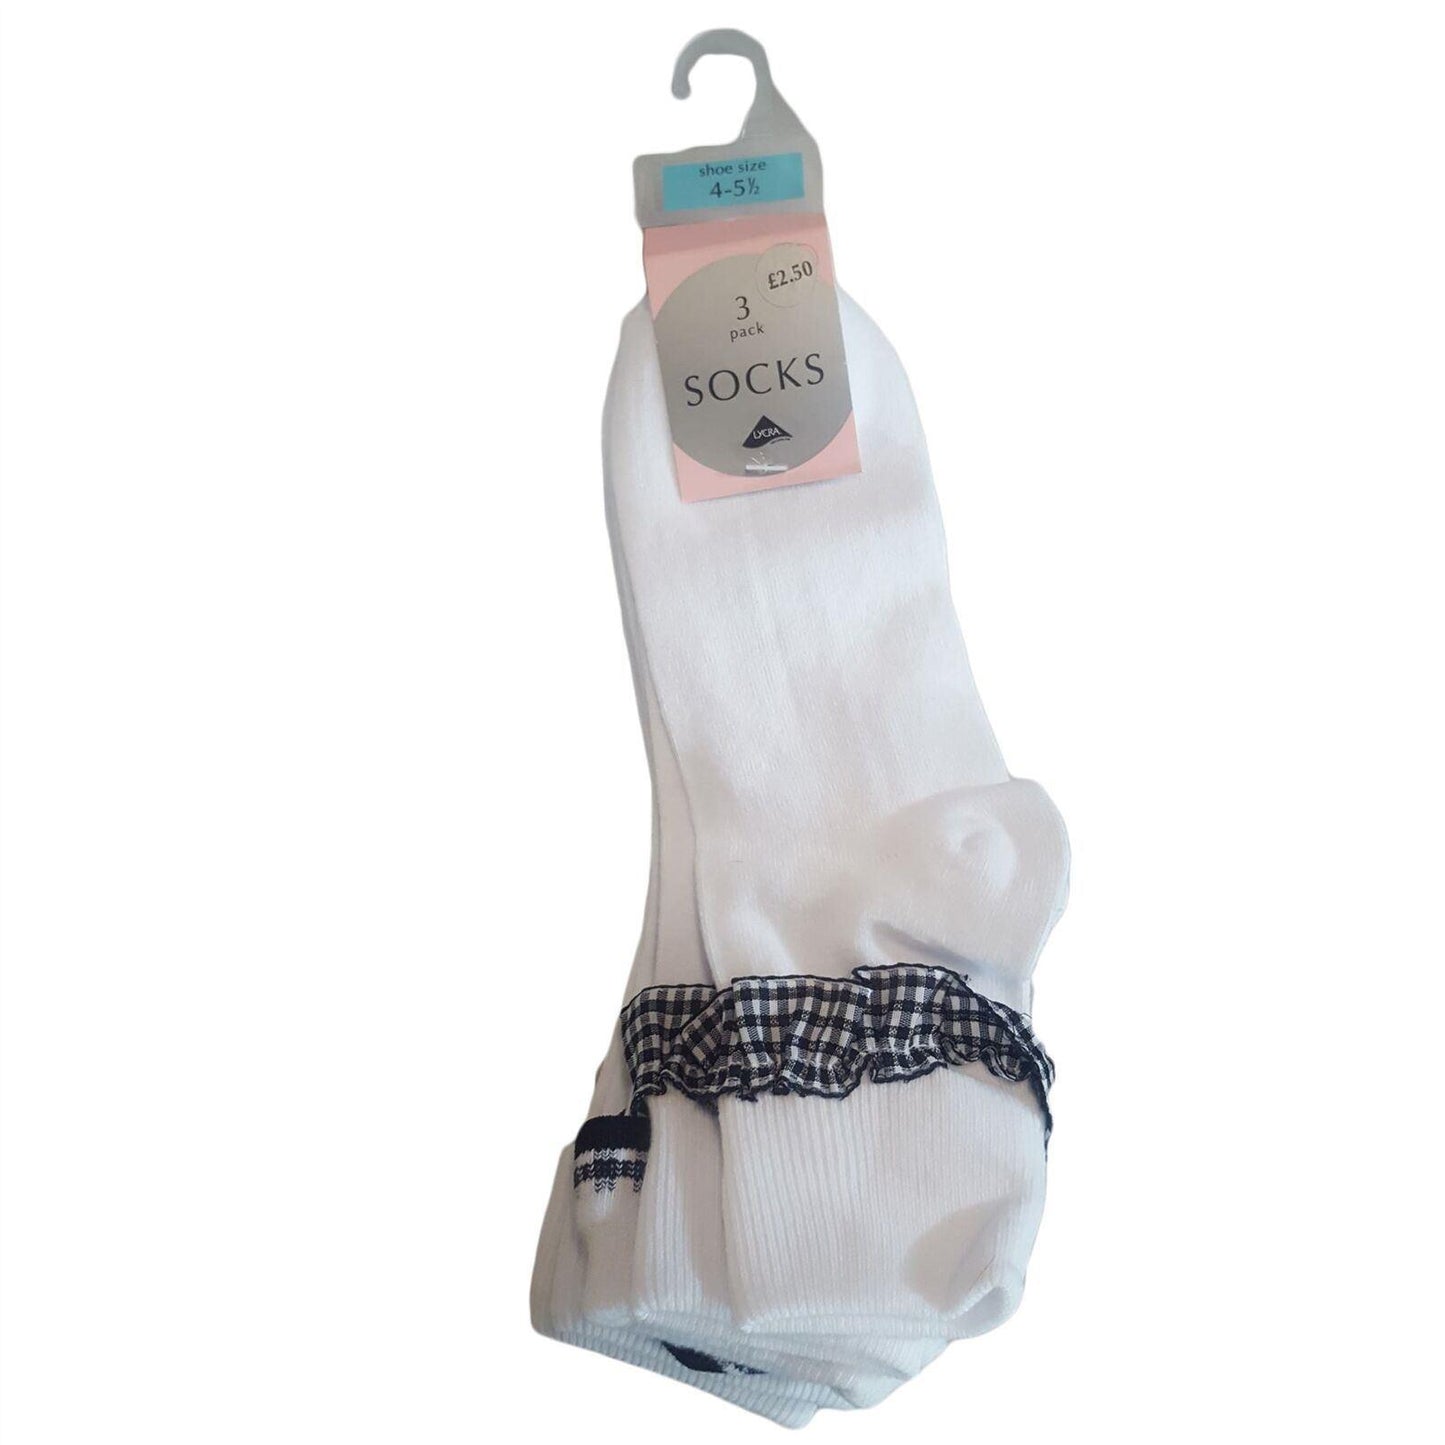 3-Pack Girls' Mixed Cute Frilly Socks